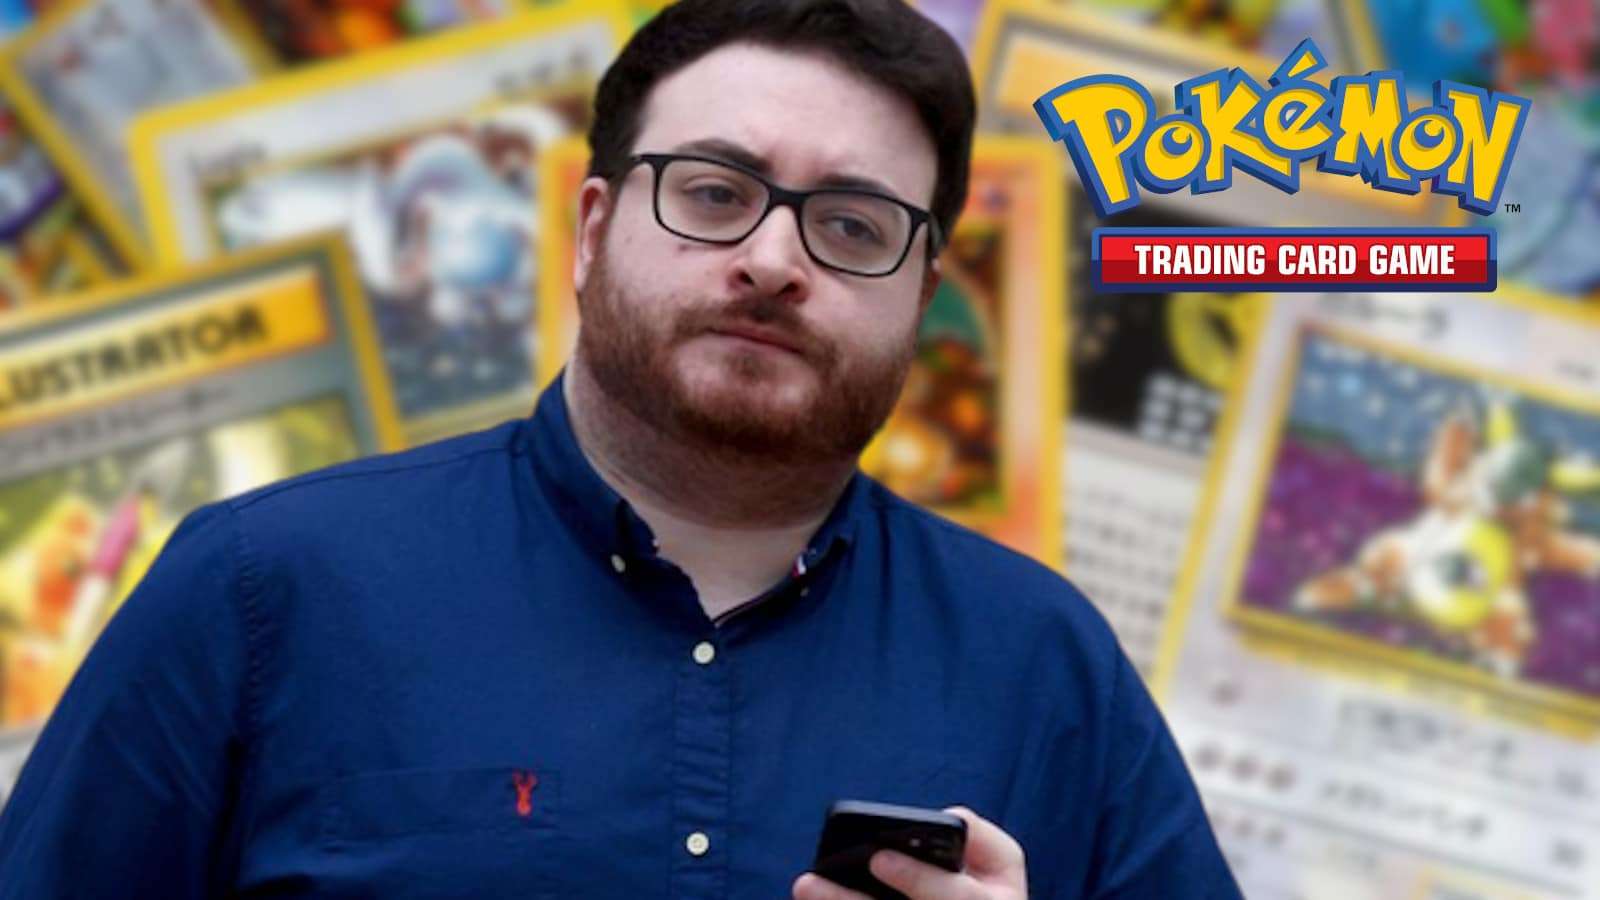 Man arrested for stealing $70,000 worth of pokemon cards